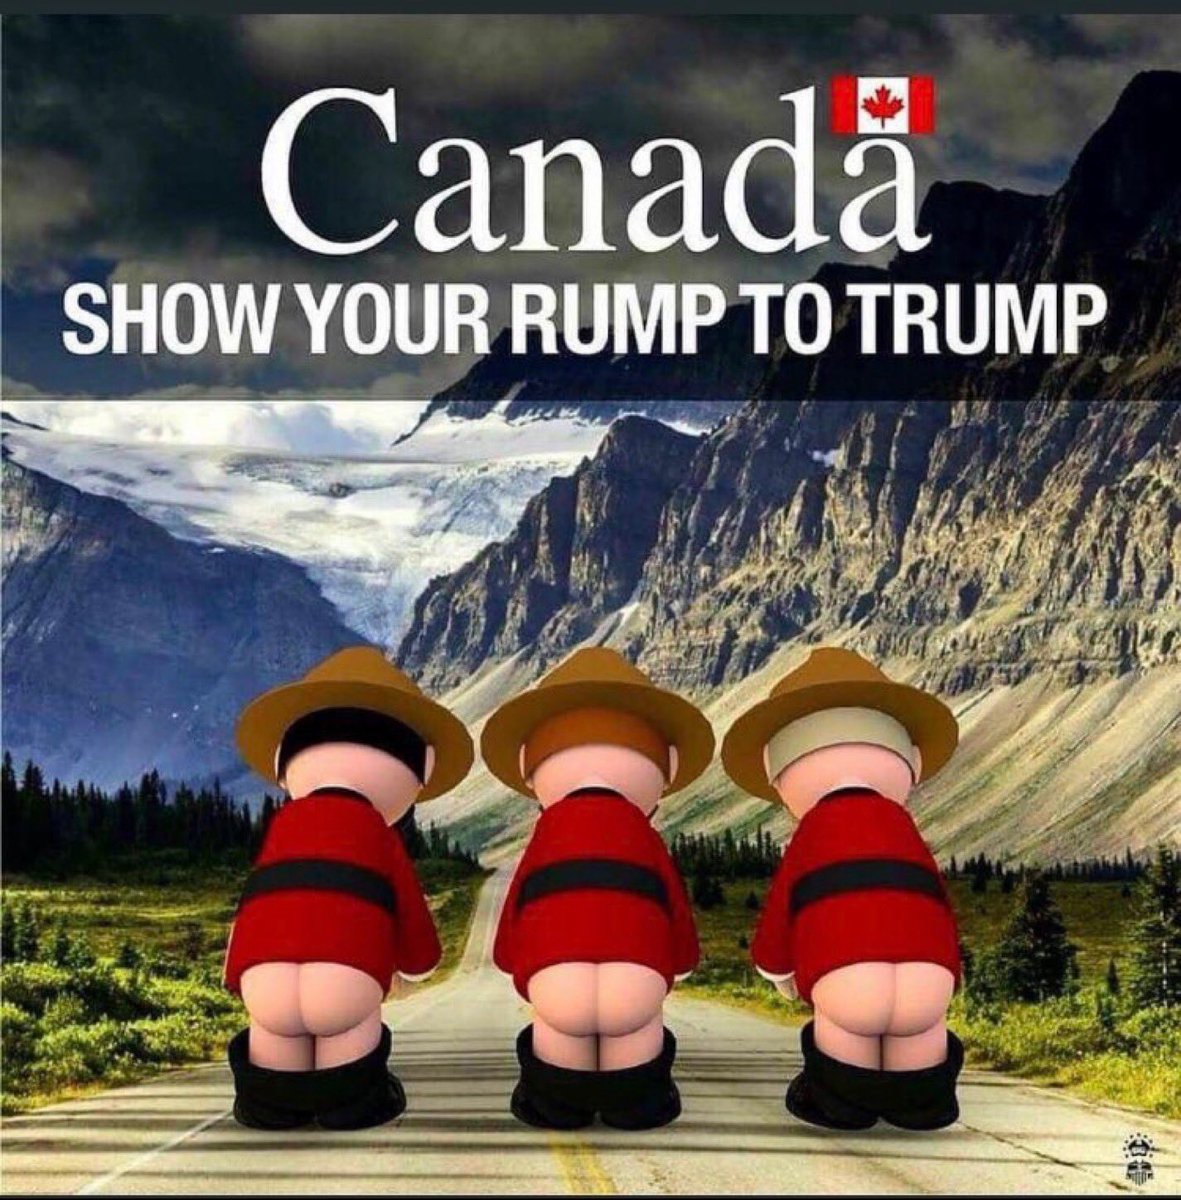 🇨🇦🇨🇦🇨🇦 On behalf of Canada: Convicts are not welcome here @realDonaldTrump